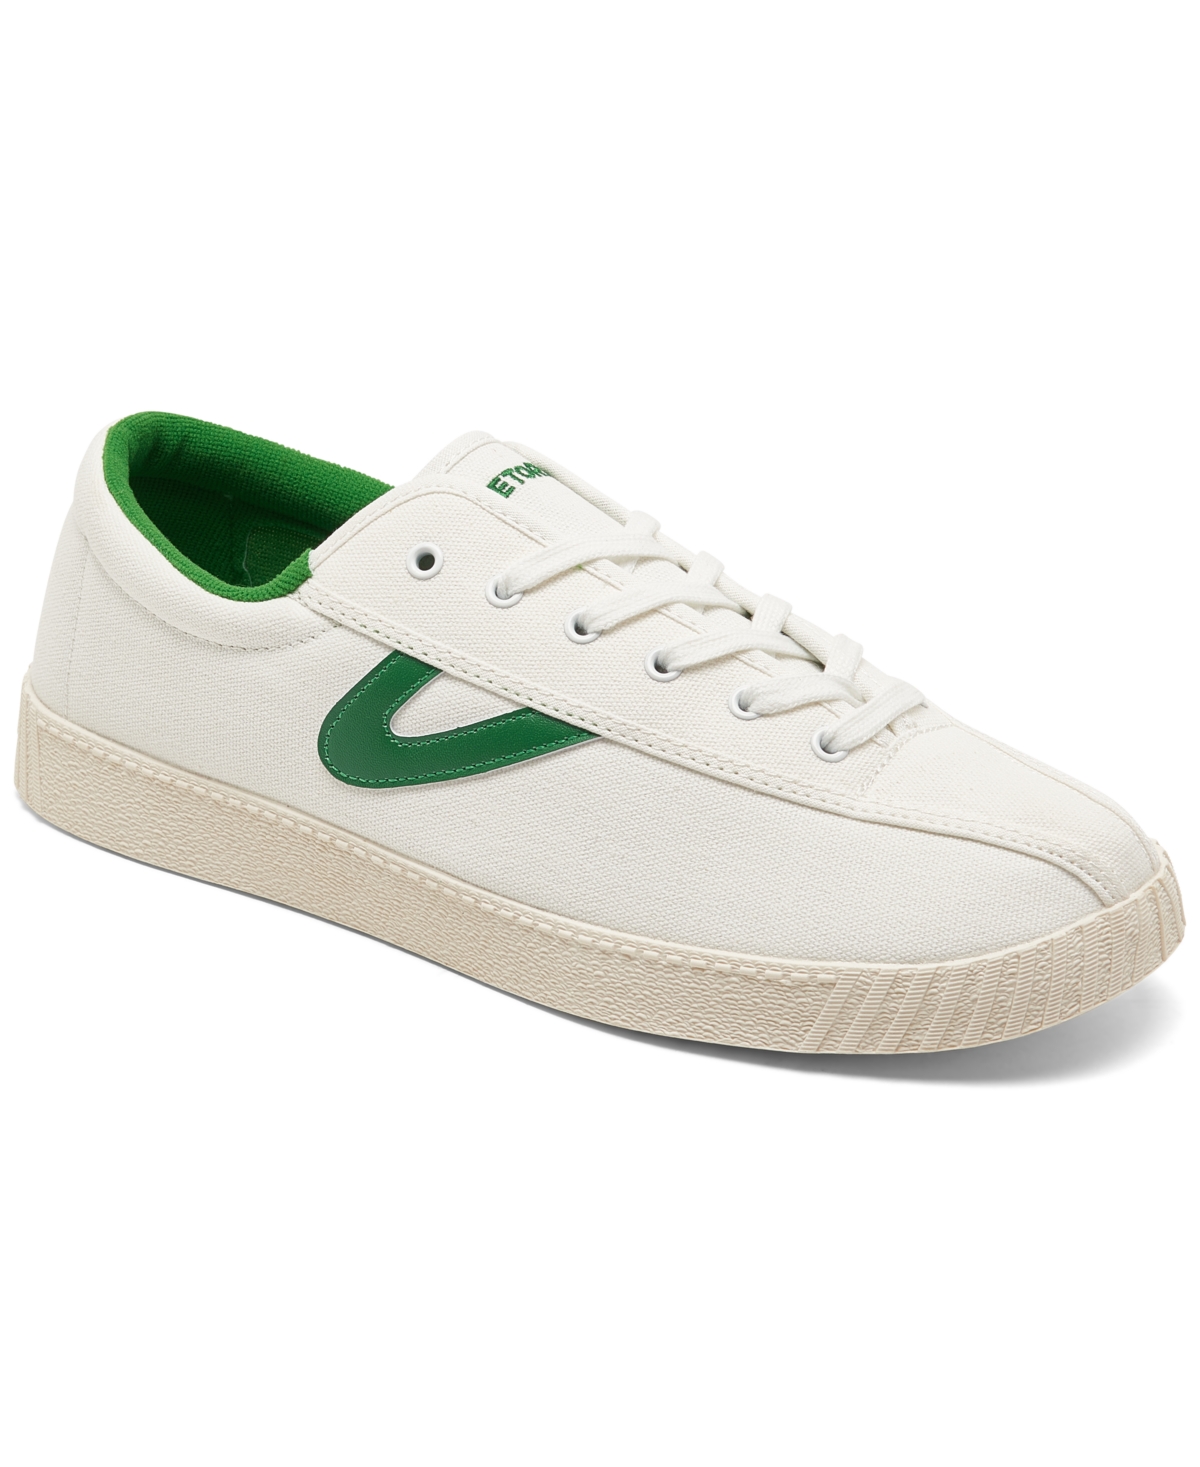 Tretorn Men's Nylite Plus Canvas Casual Sneakers From Finish Line In White,gree